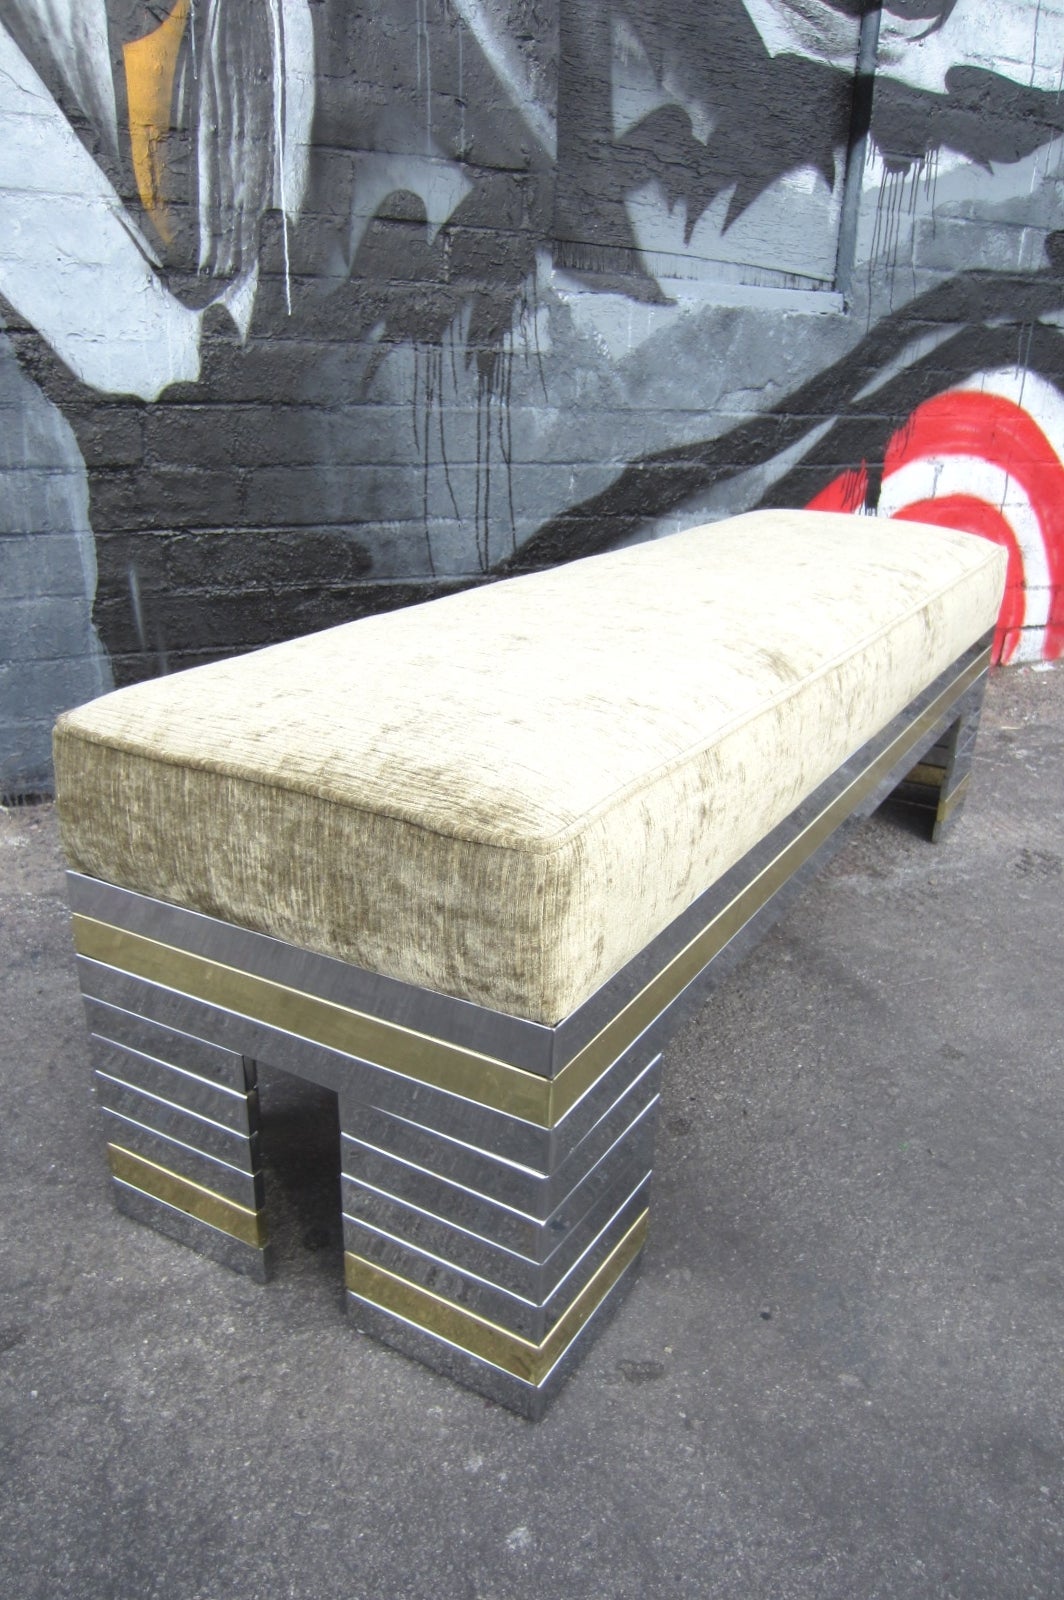 circa 1970's steel bench with individual plated bands of chrome and brass in the manner of Paul Evans cityscape design. We couldn't find any other examples of this bench anywhere. 
Long(5 ft.) and narrow gallery style bench with cushy upholstered